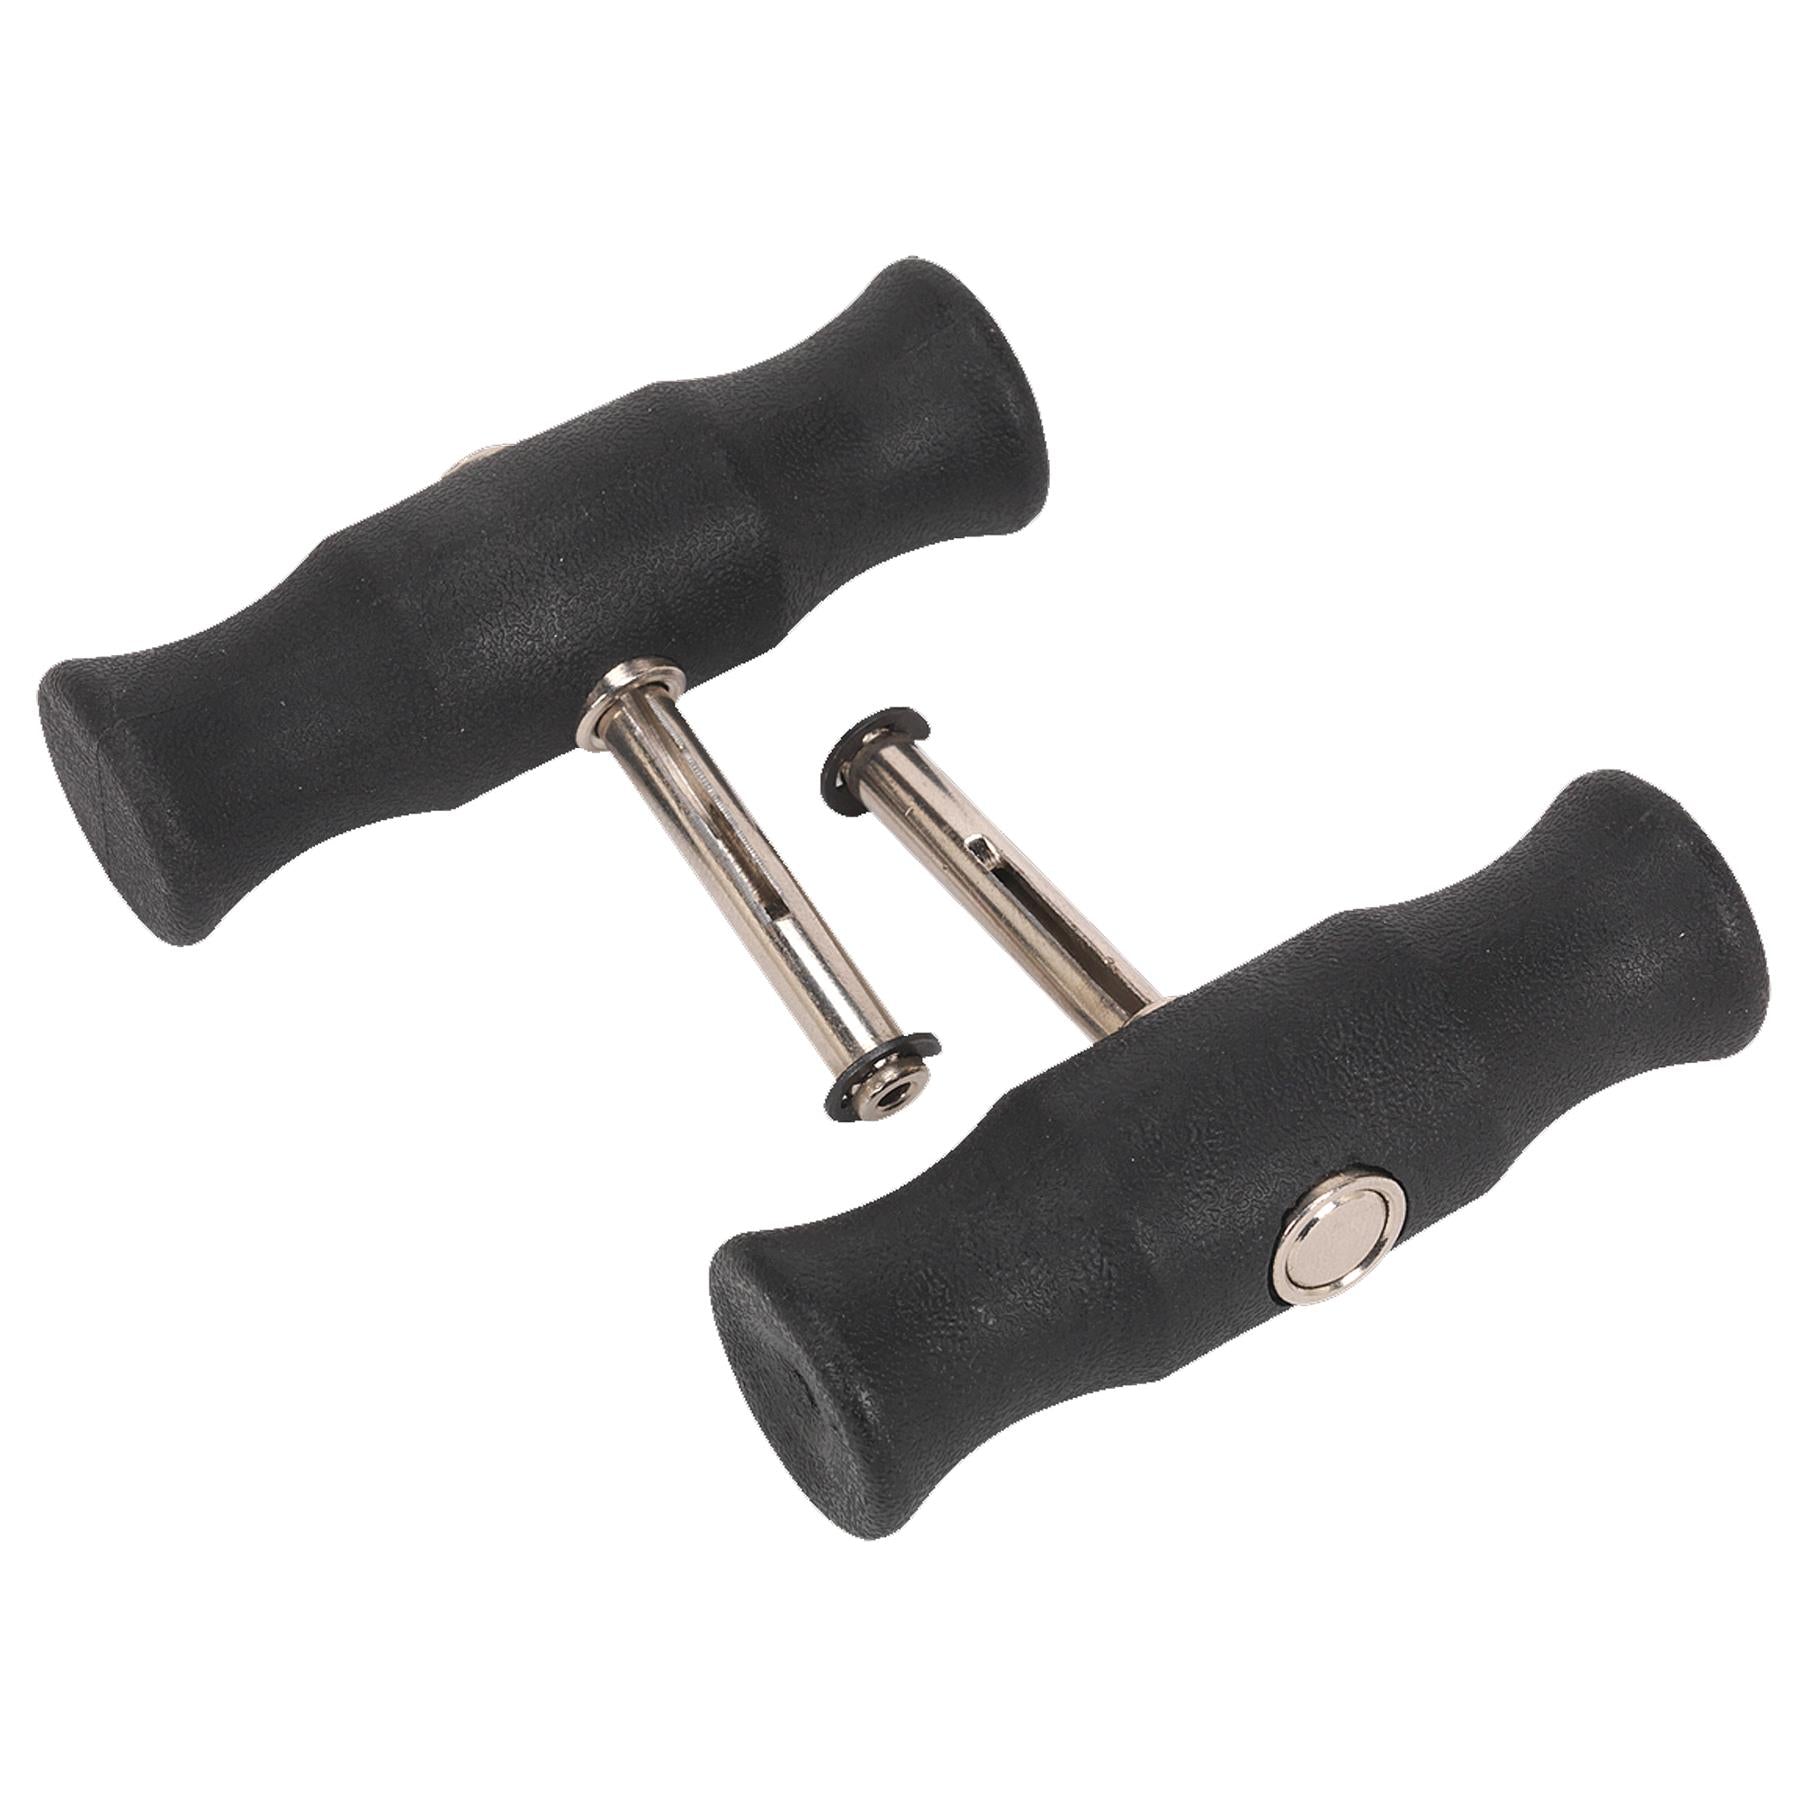 1 Pair Wire Grip Handles -  ABS handles Suitable for use with windscreen cutting wire. Sealey